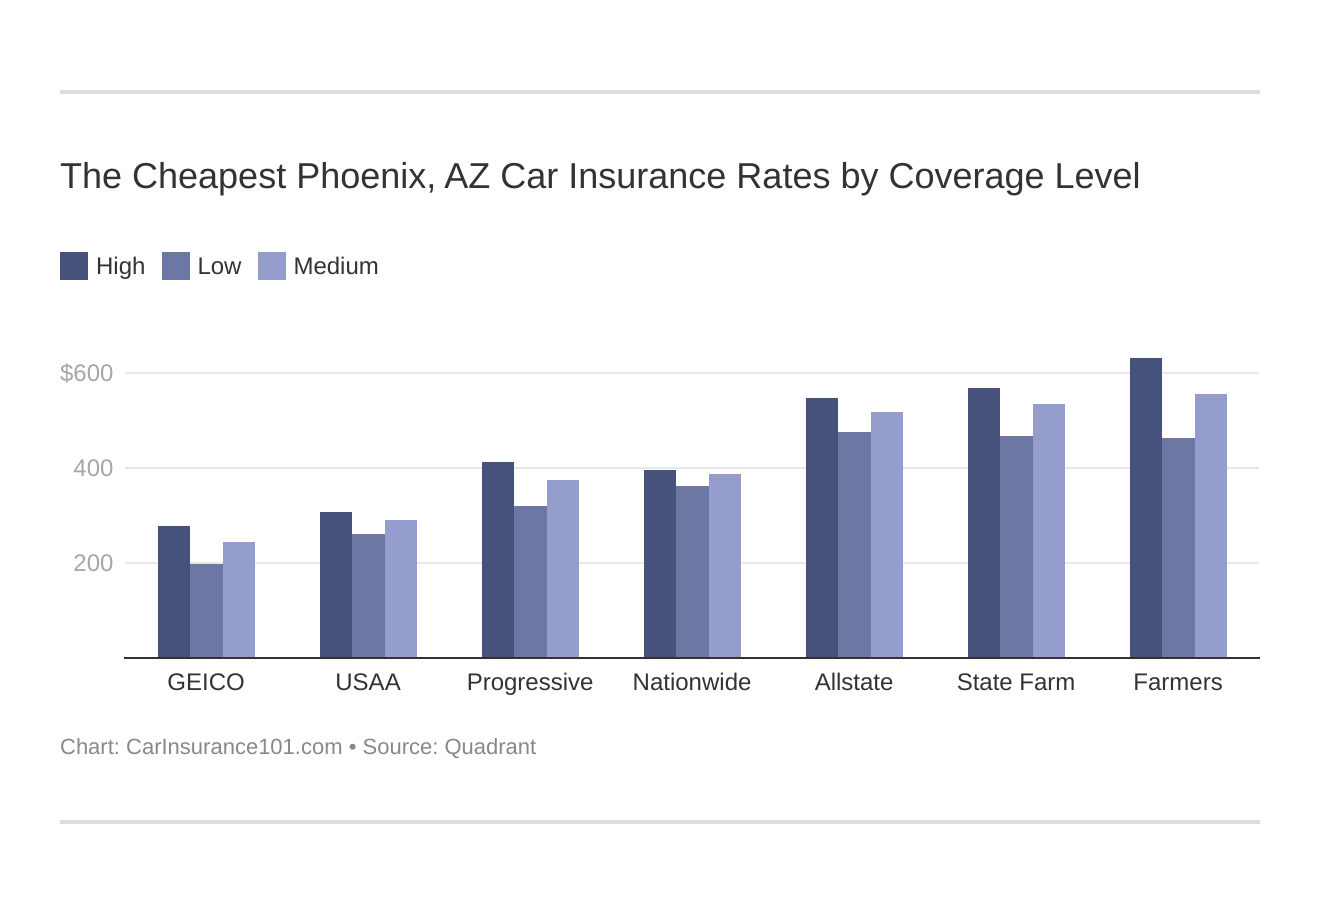 The Cheapest Phoenix, AZ Car Insurance Rates by Coverage Level